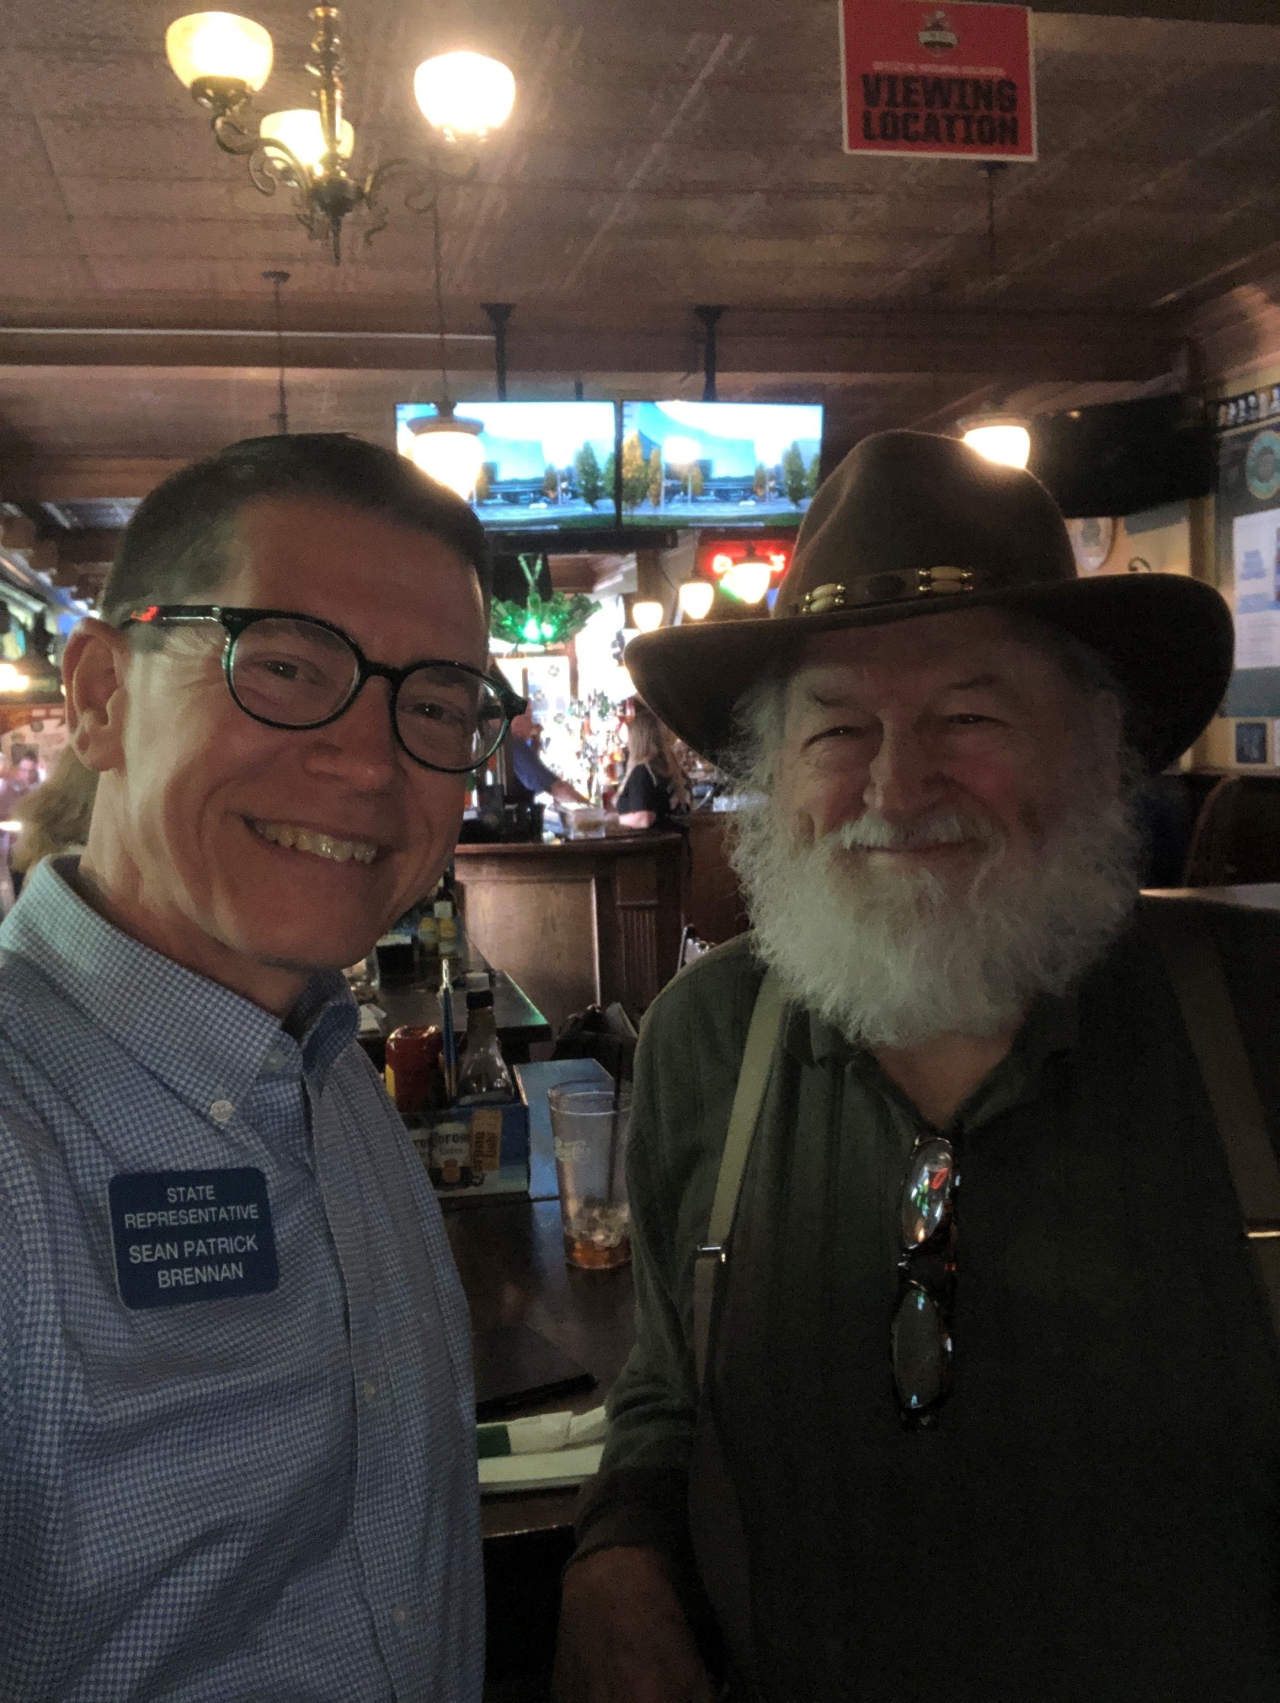 Murray Evans from Cleveland took time to visit me during my in-district office hours at P.J. McIntyre's.  Talking with residents makes Rep. Brennan a better representative of the people.